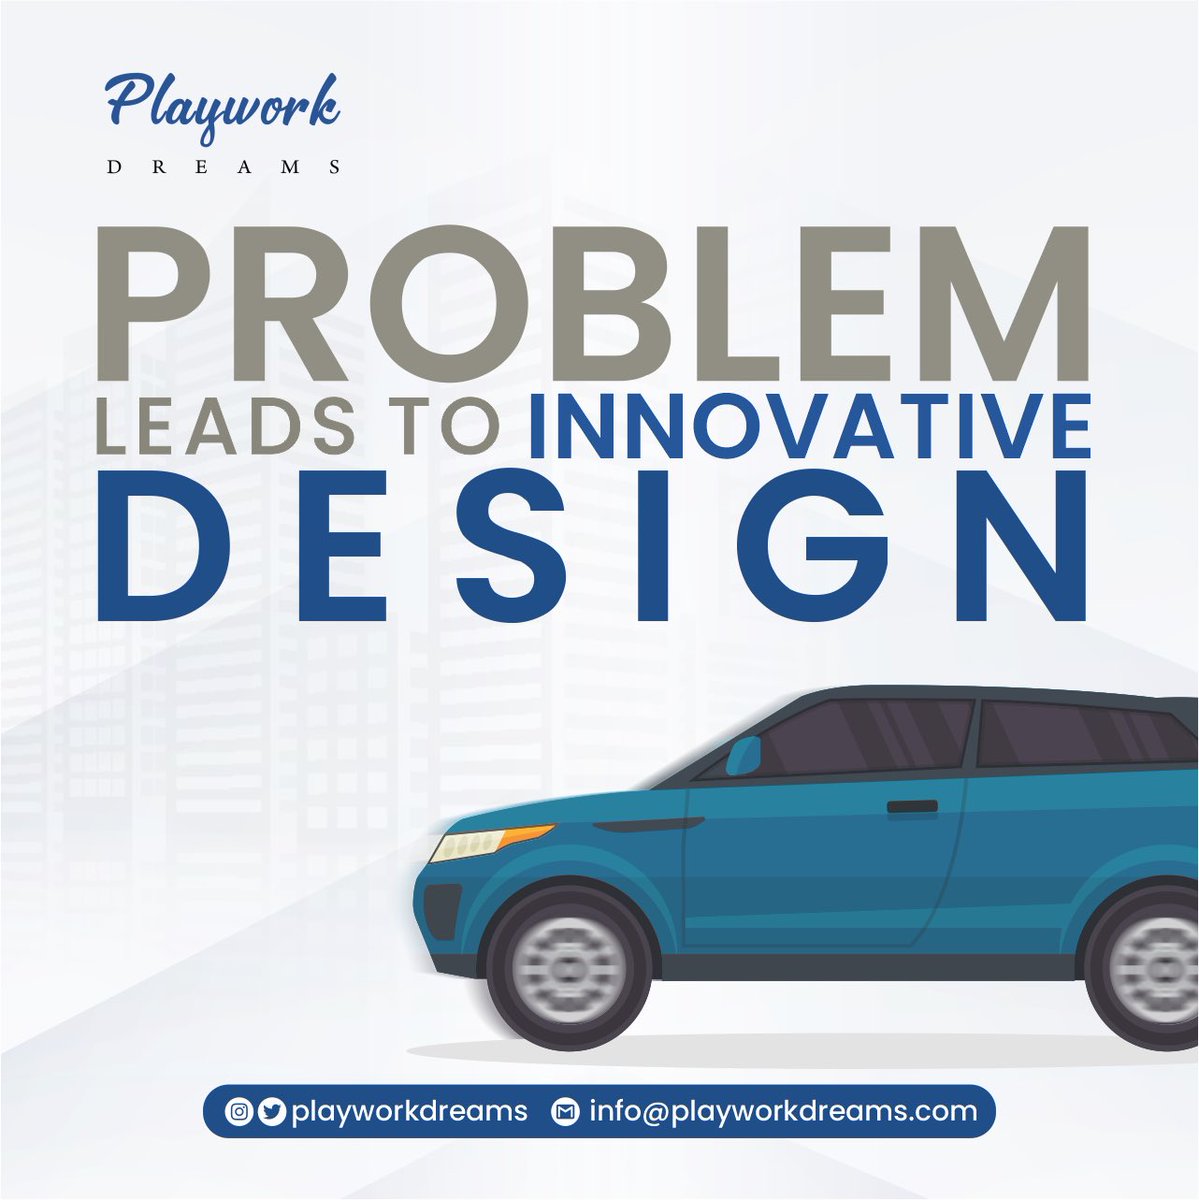 Imagine there was no invention of cars yet and we had to do hours of walking and carrying. 

Imagine you had to walk for hours daily? 

With Problems come innovative designs 

#pwdagency